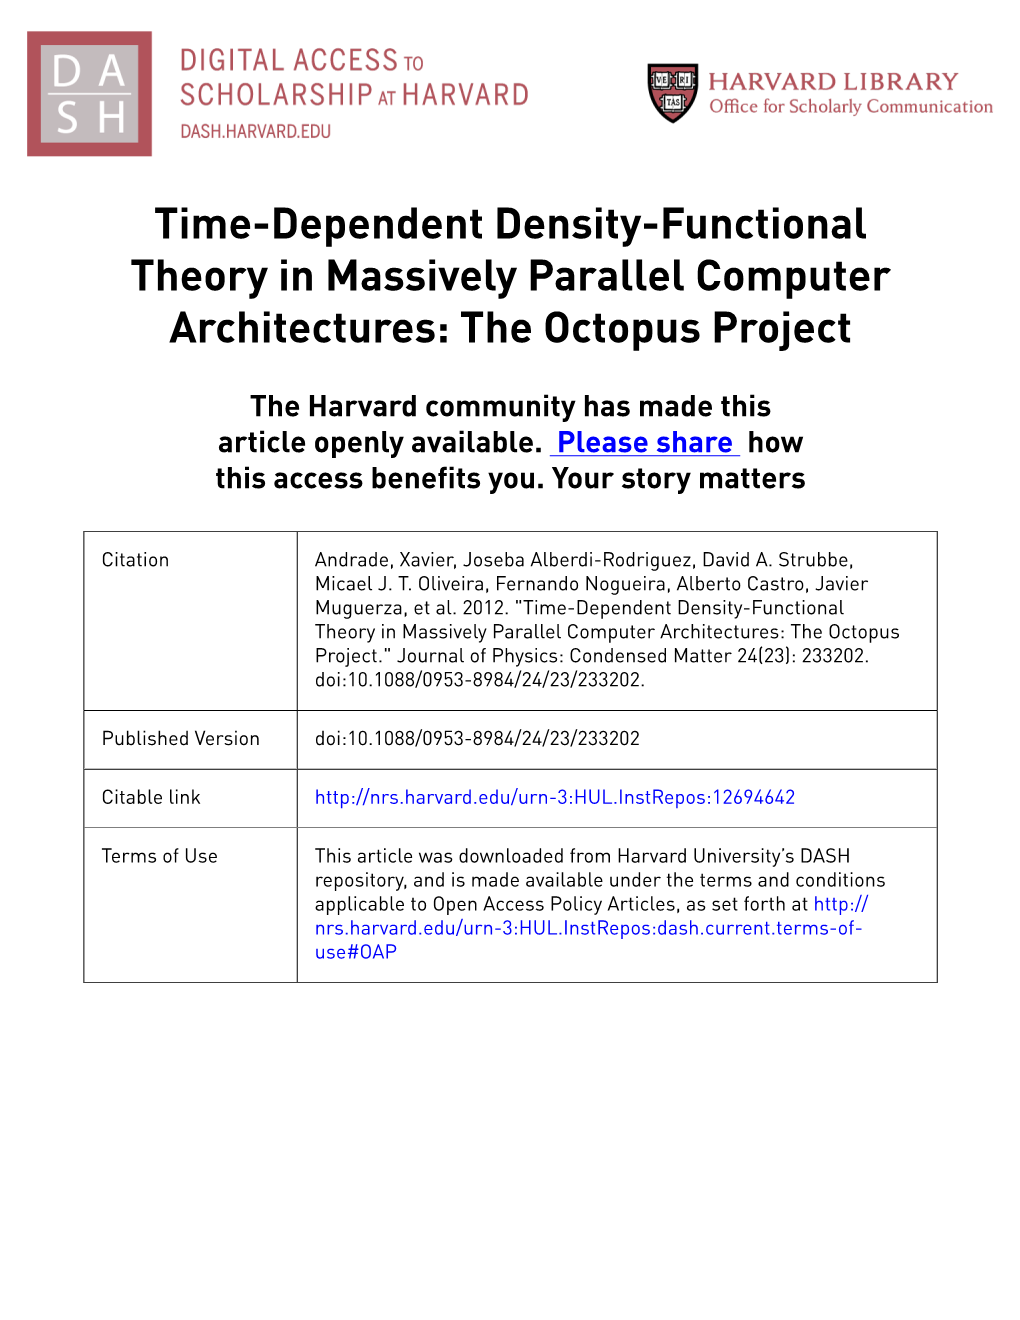 Time-Dependent Density-Functional Theory in Massively Parallel Computer Architectures: the Octopus Project